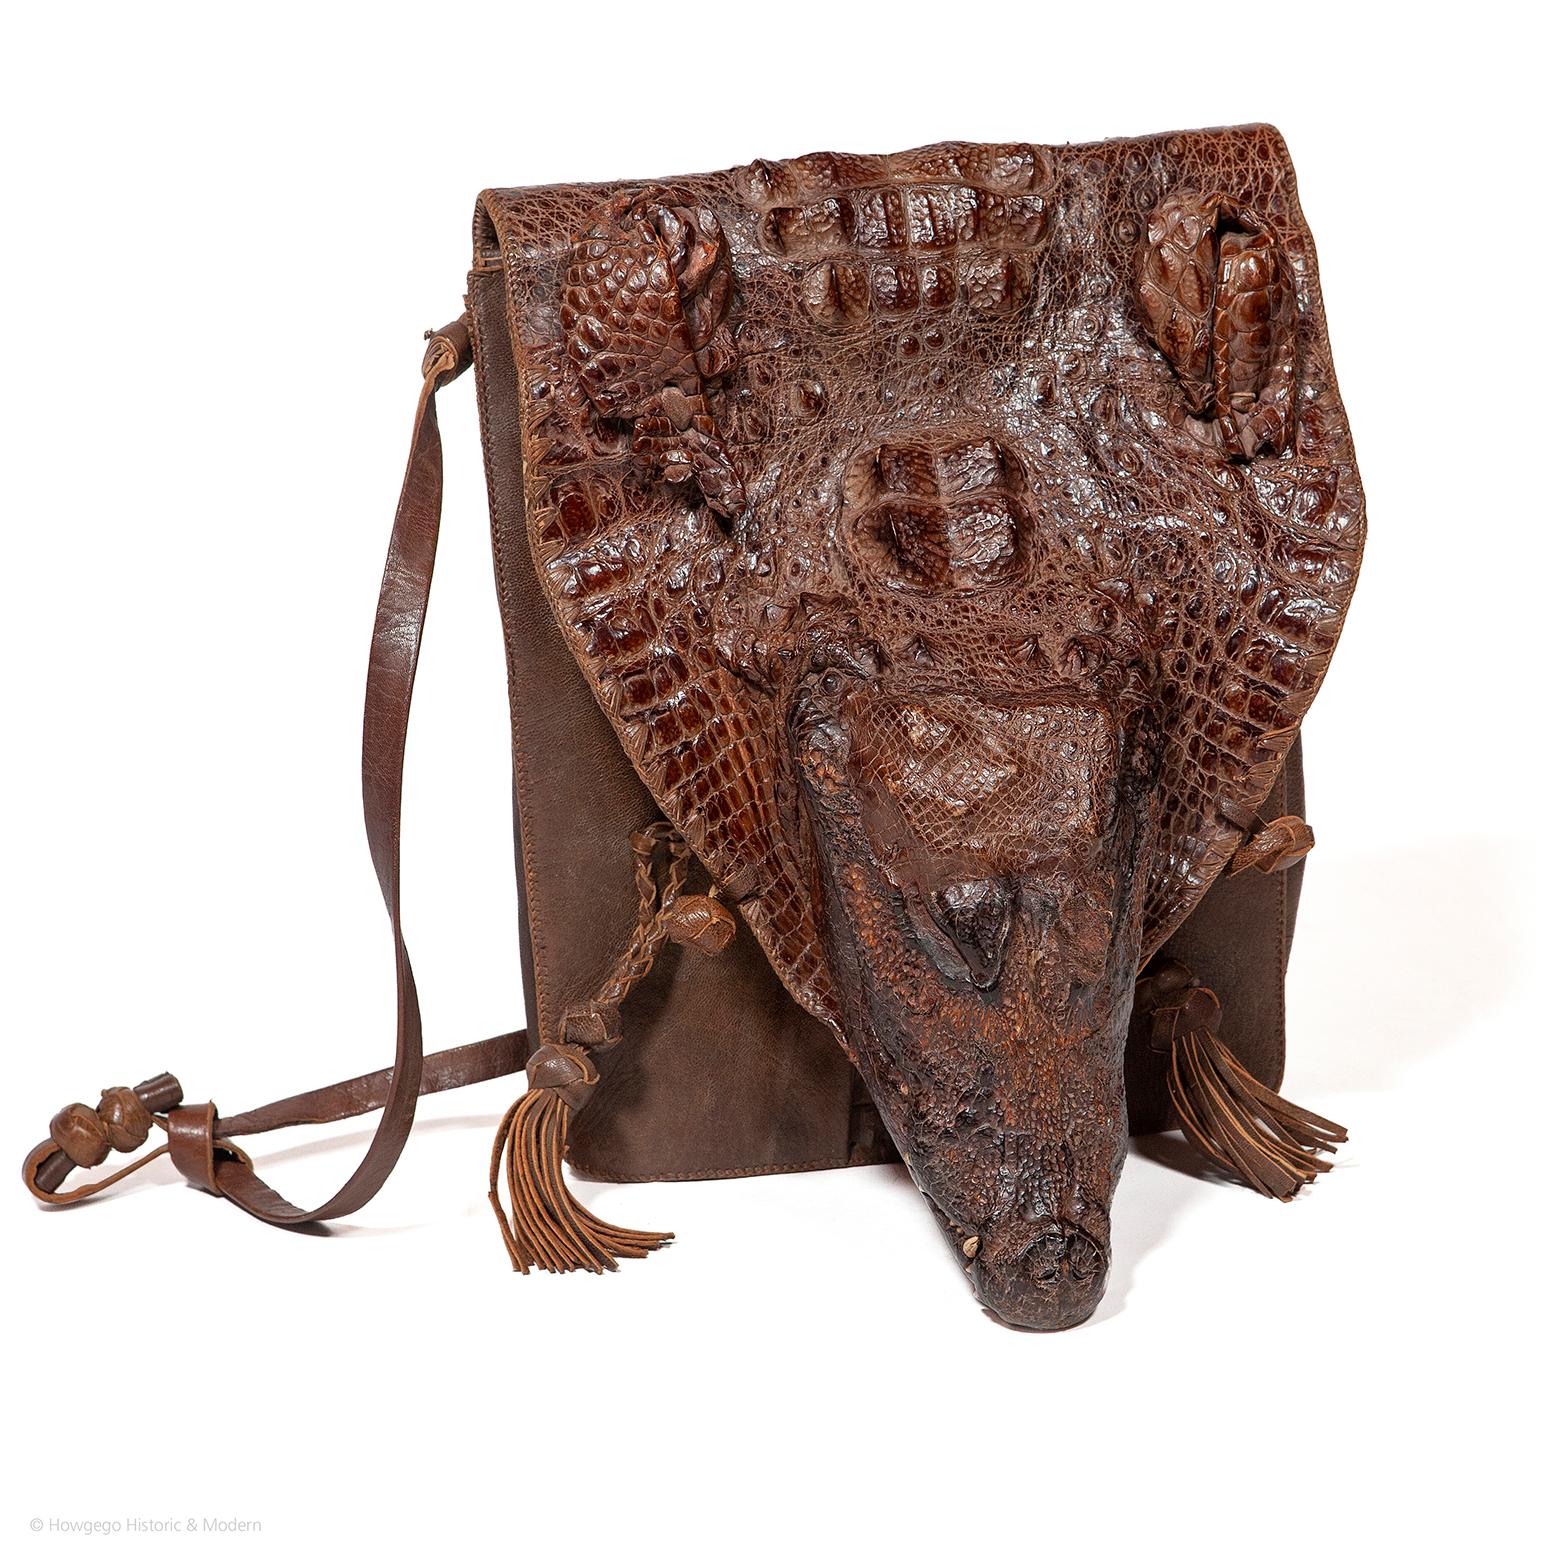 Made from one complete small crocodile skin including head with teeth, hornback and legs into a shoulder, cross or satchel, excluding the tail.  The scales wrapping from front to back with outstanding rich, colouring ,depth and patterning.  The